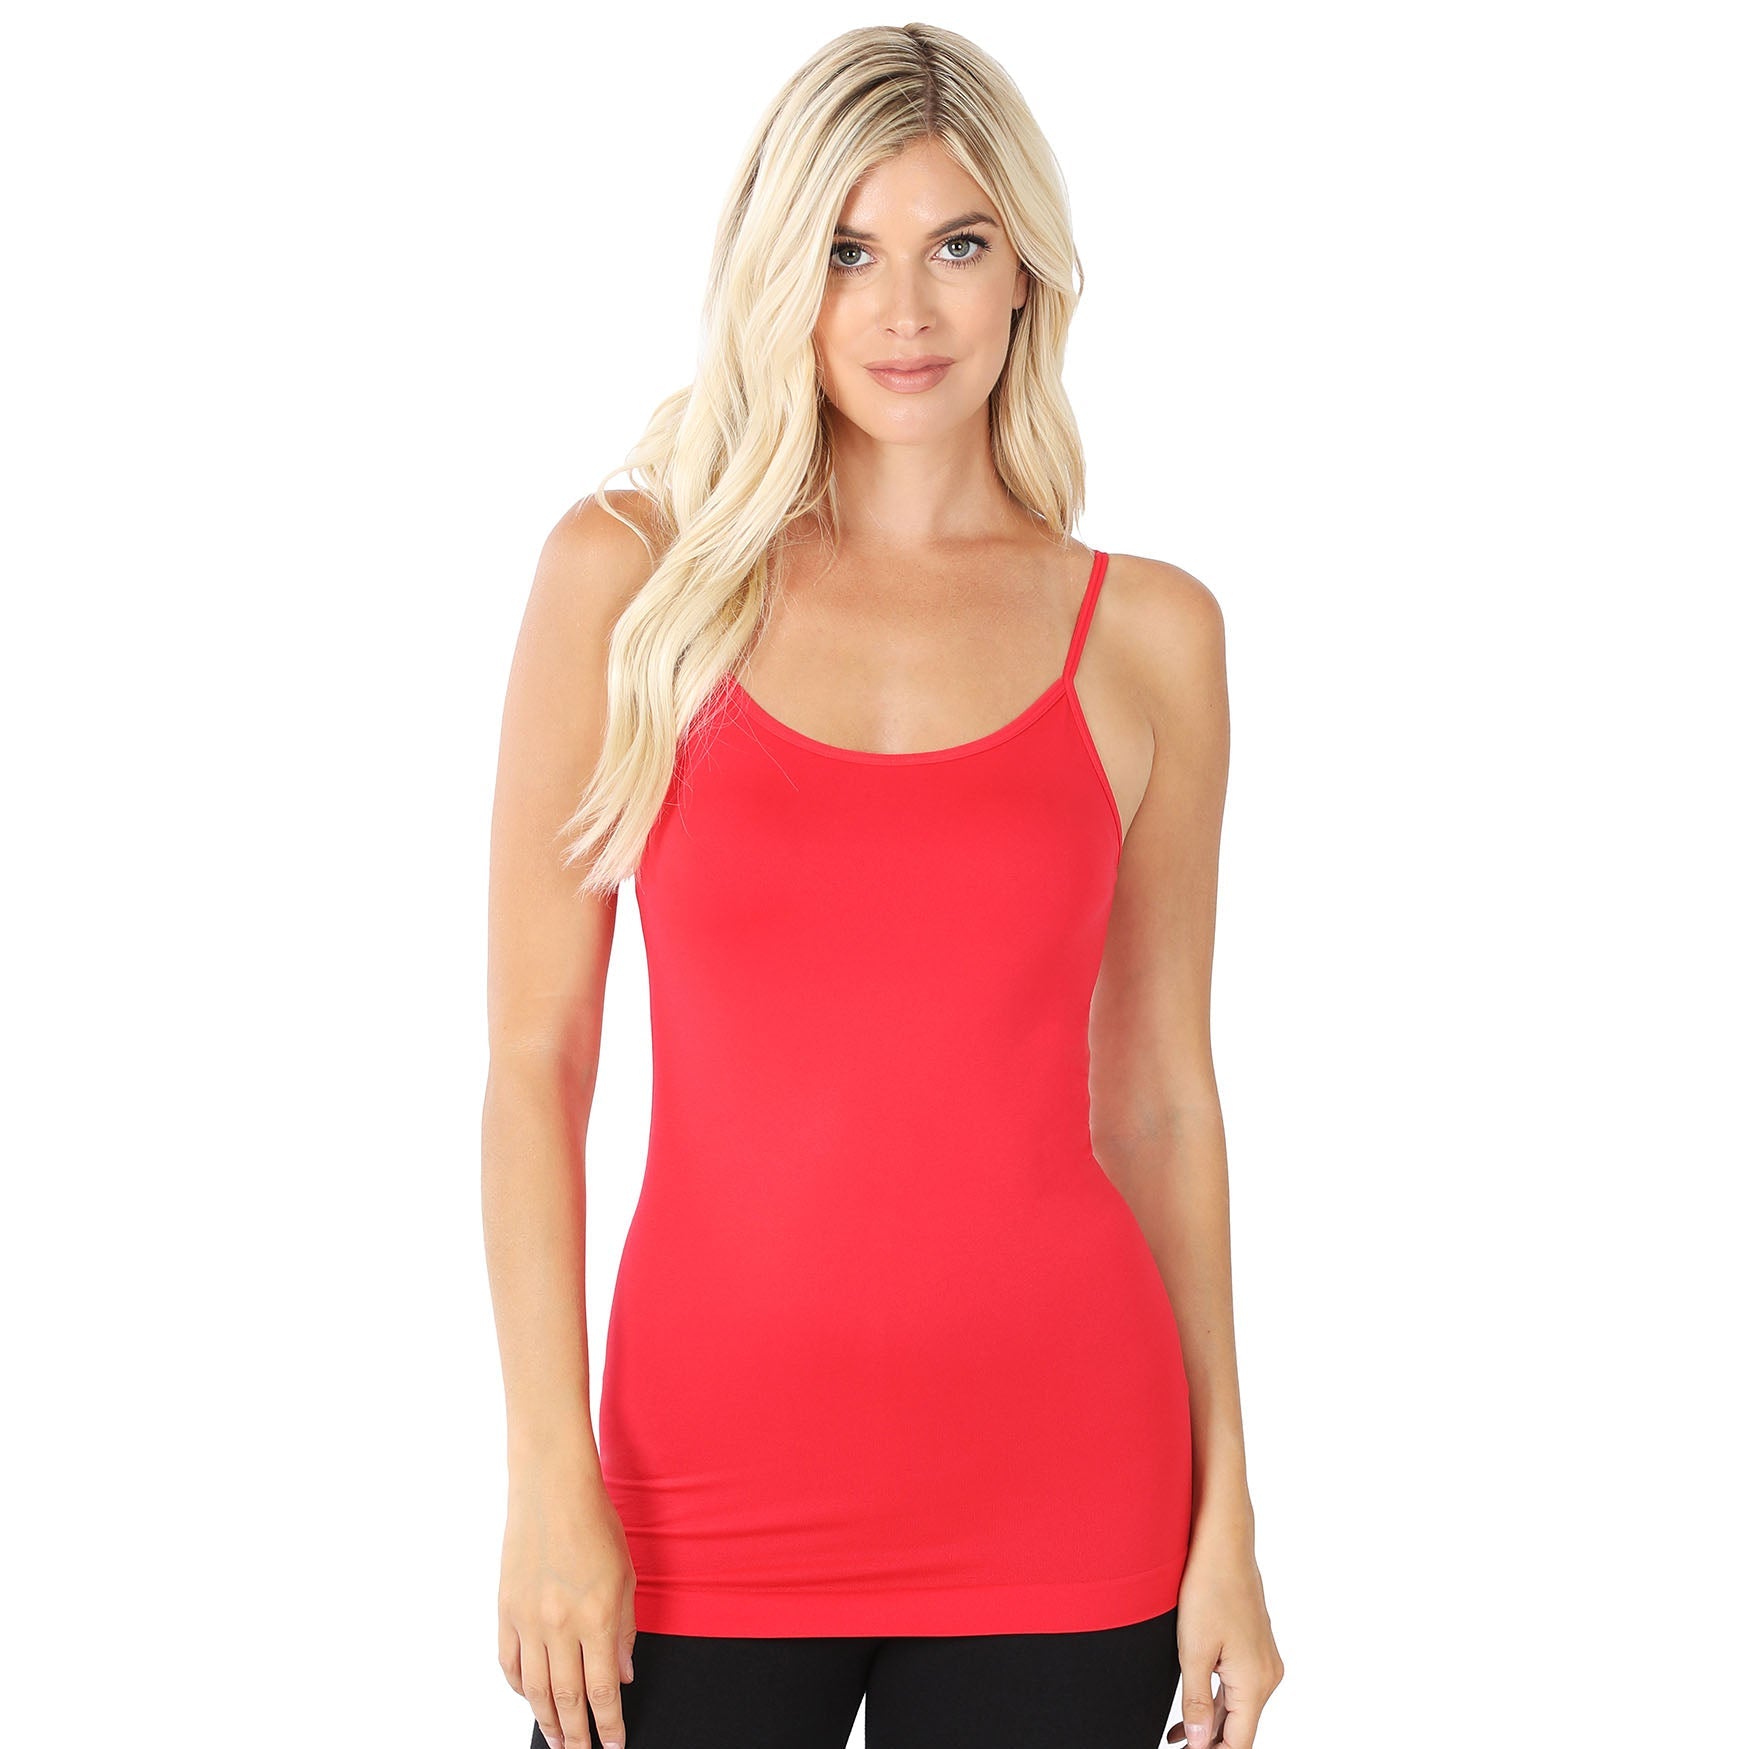 Women's V-Neck Adjustable Strap Modal Camisole Tank Top with Built